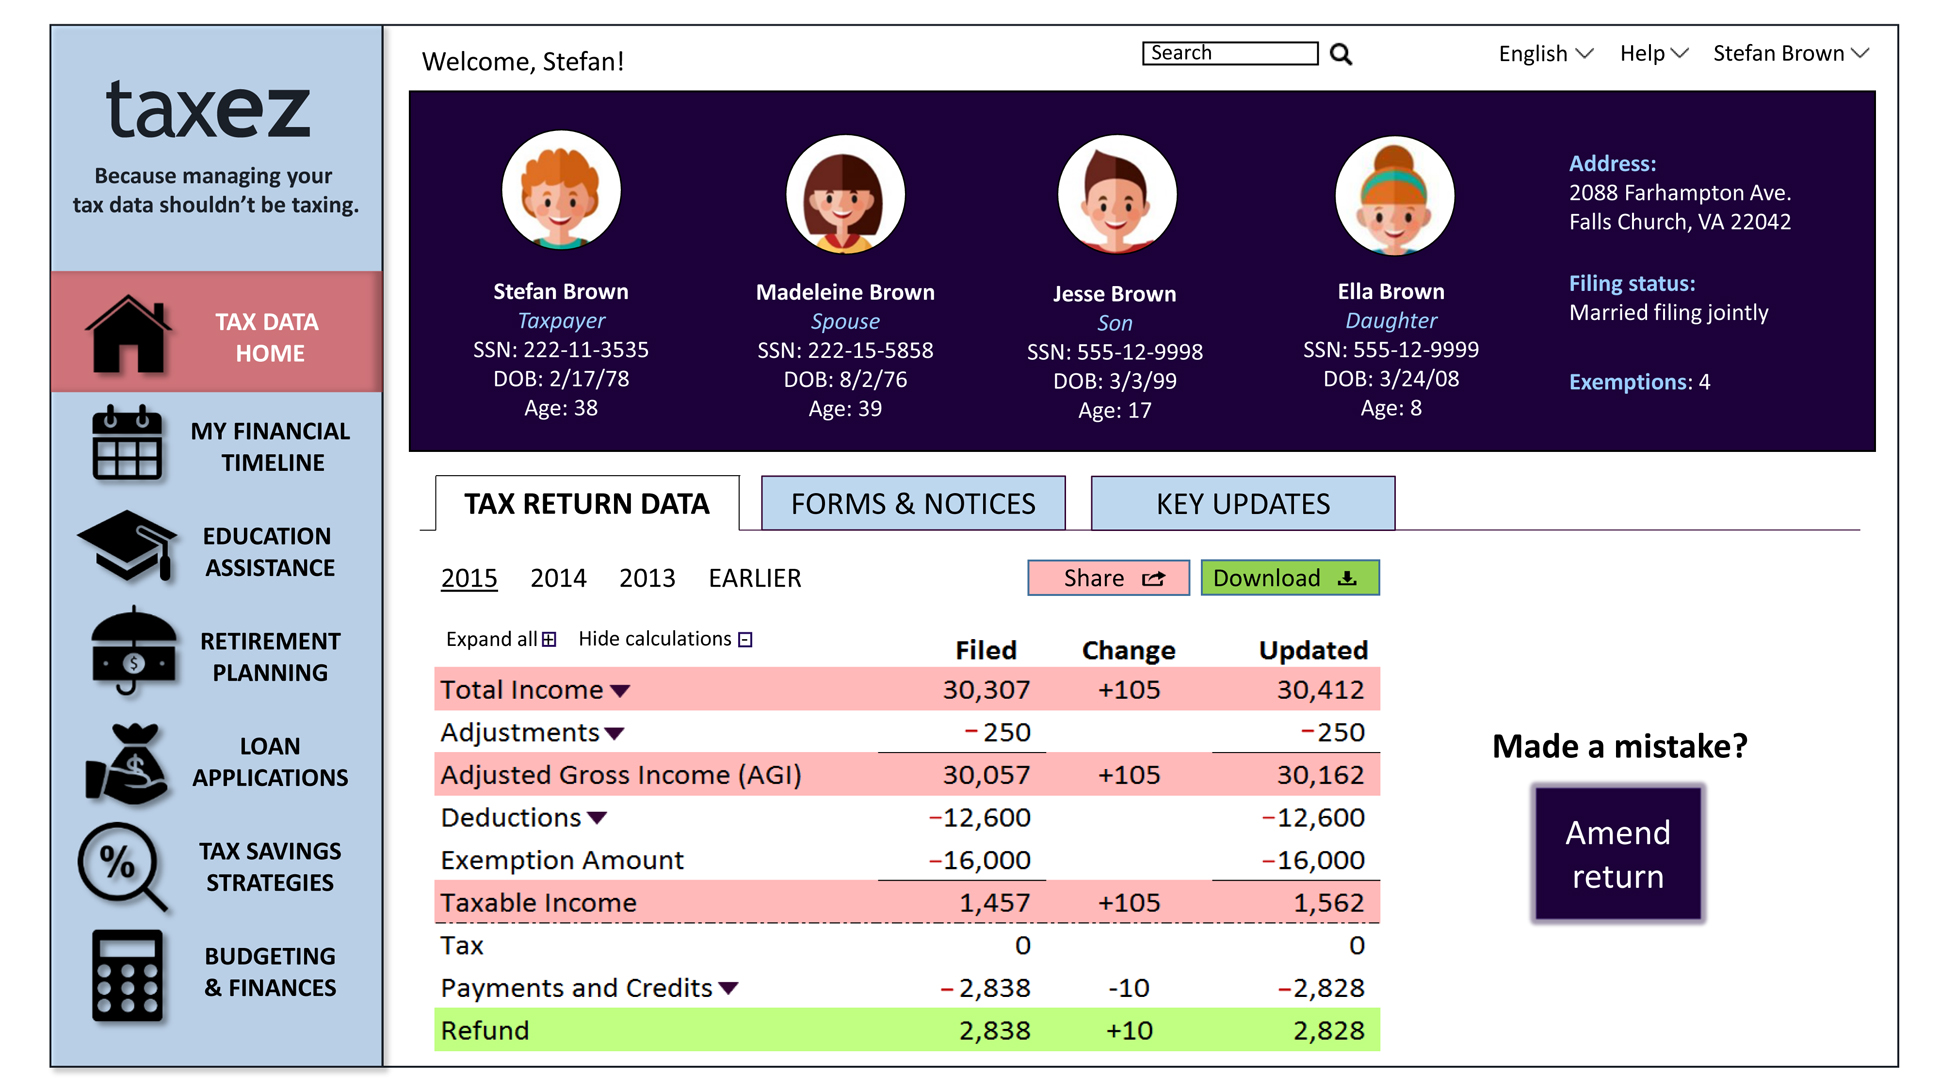 A page from a tax design challenge submission. This page shows each family member and their information. The family’s 2015 Tax Return Data is shown and the option to amend the return if there is a mistake.